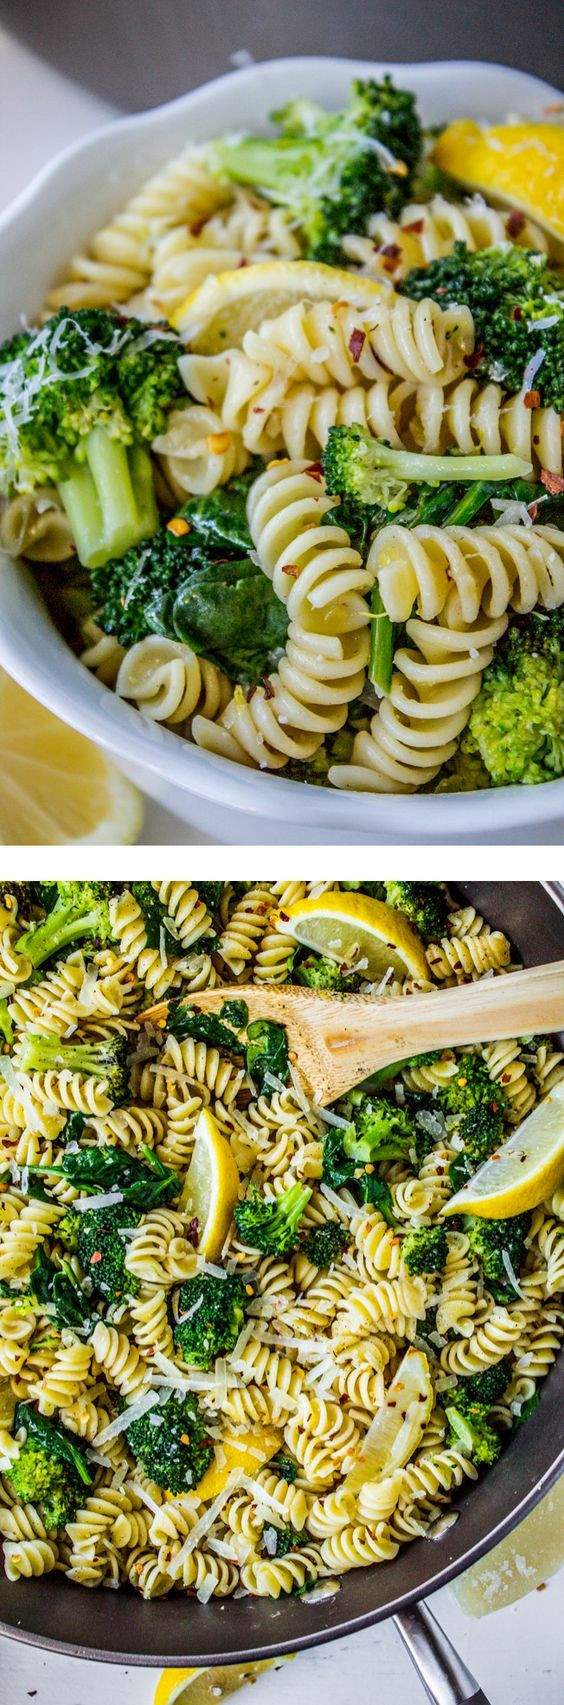 Easy Healthy Dinner Recipes
 100 Easy healthy recipes on Pinterest